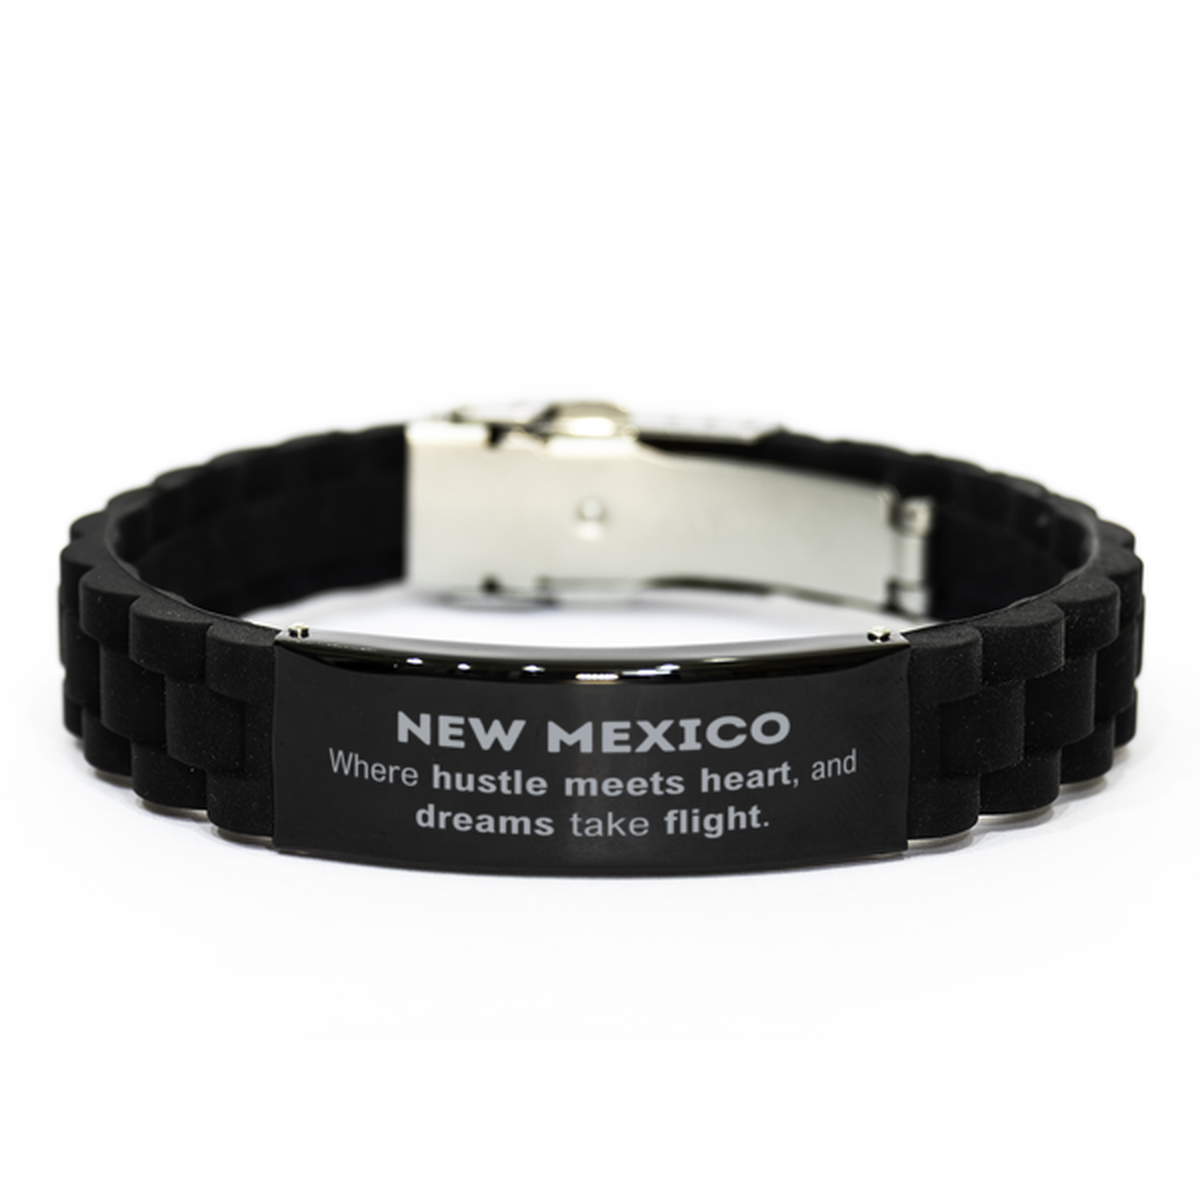 New Mexico: Where hustle meets heart, and dreams take flight, New Mexico Gifts, Proud New Mexico Christmas Birthday New Mexico Black Glidelock Clasp Bracelet, New Mexico State People, Men, Women, Friends